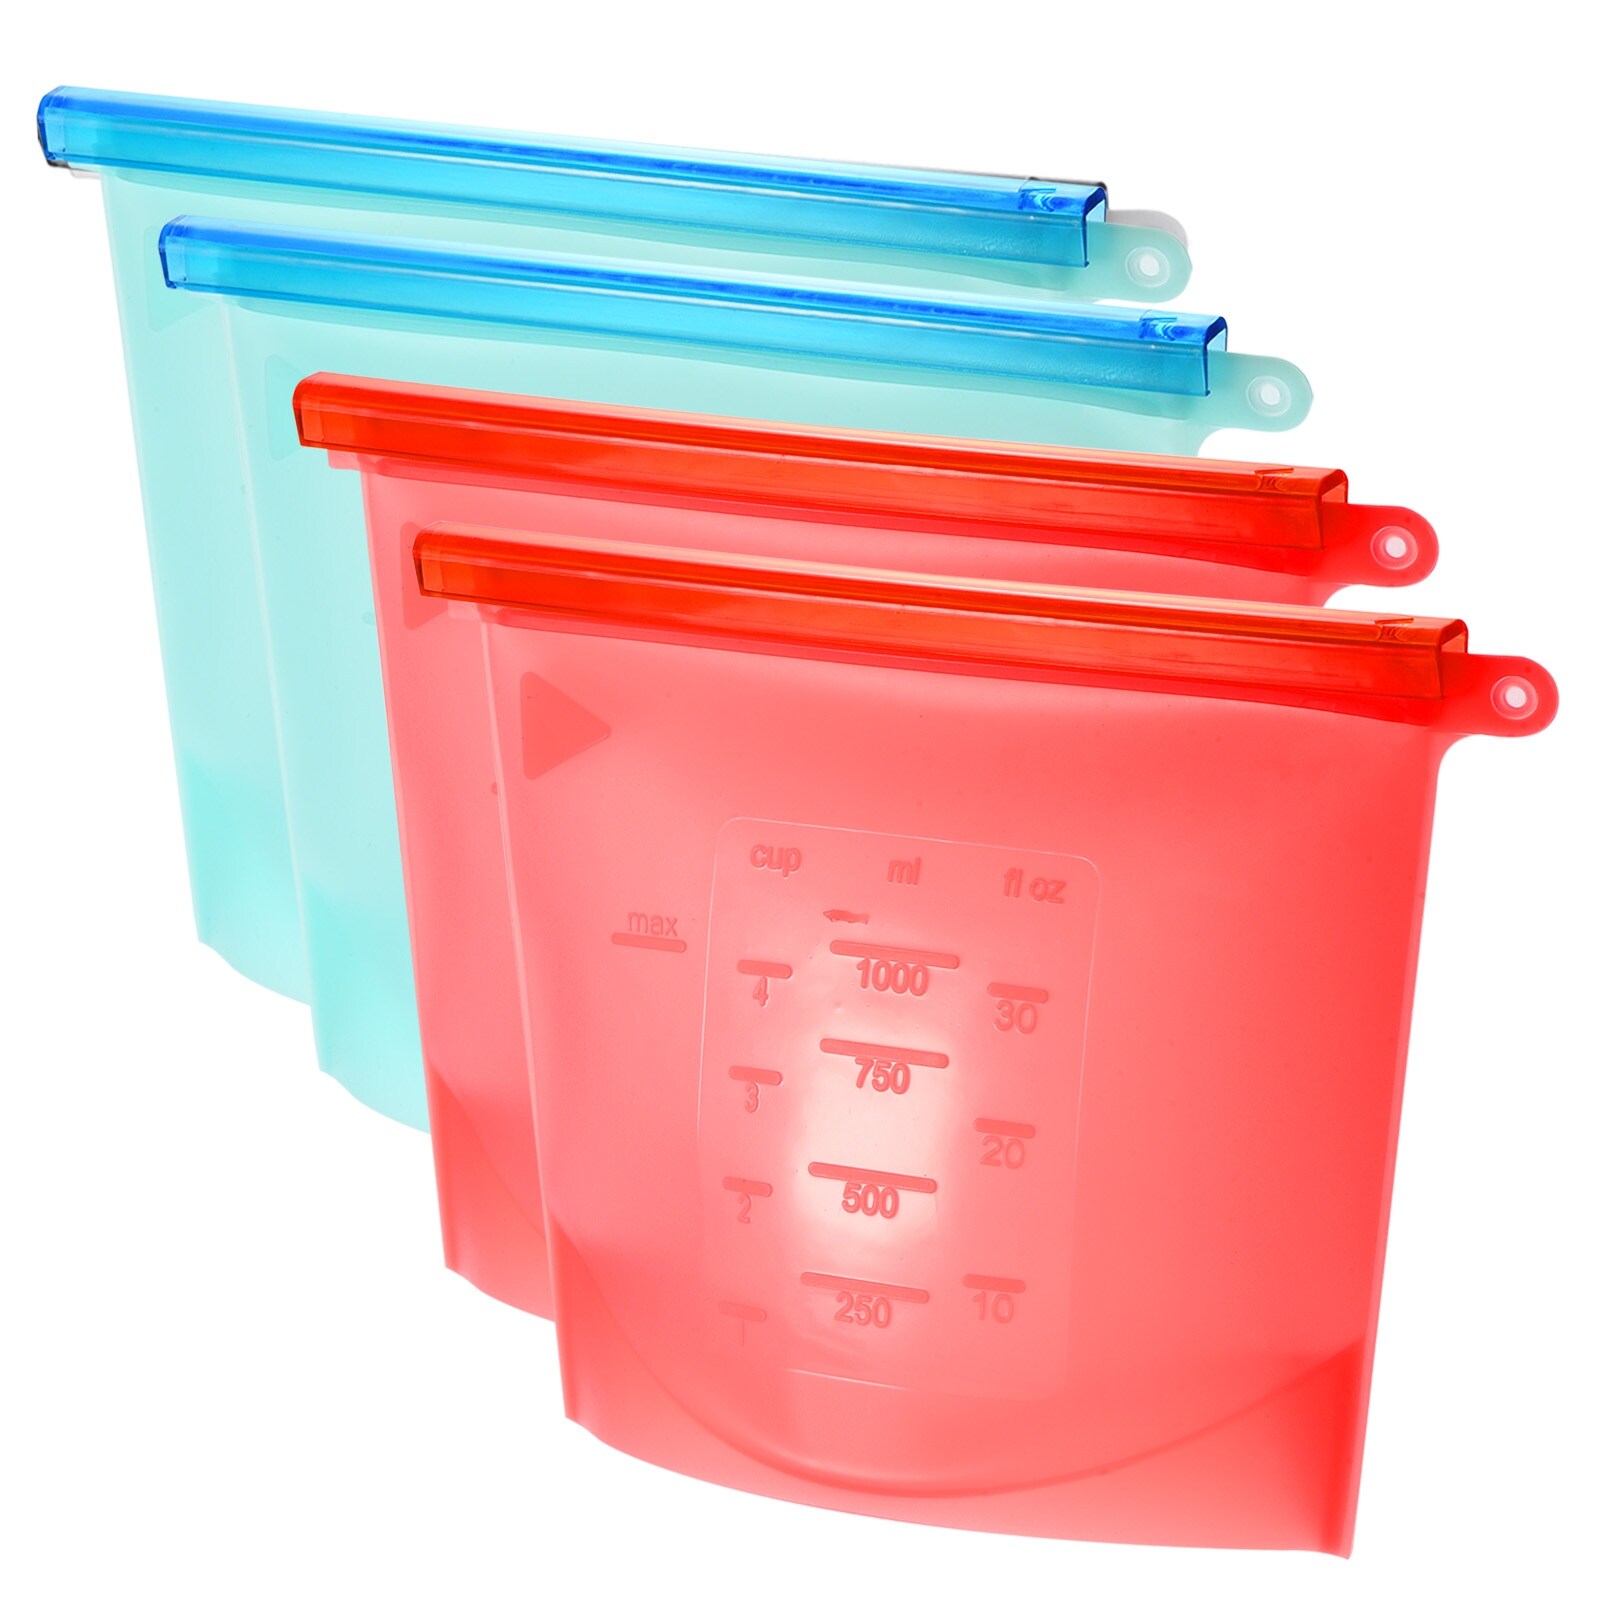 https://ak1.ostkcdn.com/images/products/is/images/direct/375ff412007b4c4487fadc72af8f0bed52870da4/Reusable-Food-Storage-Bags-Silicone-Freezer-Bag-Fresh-Keeping-Blue%2BRed-4Pcs.jpg